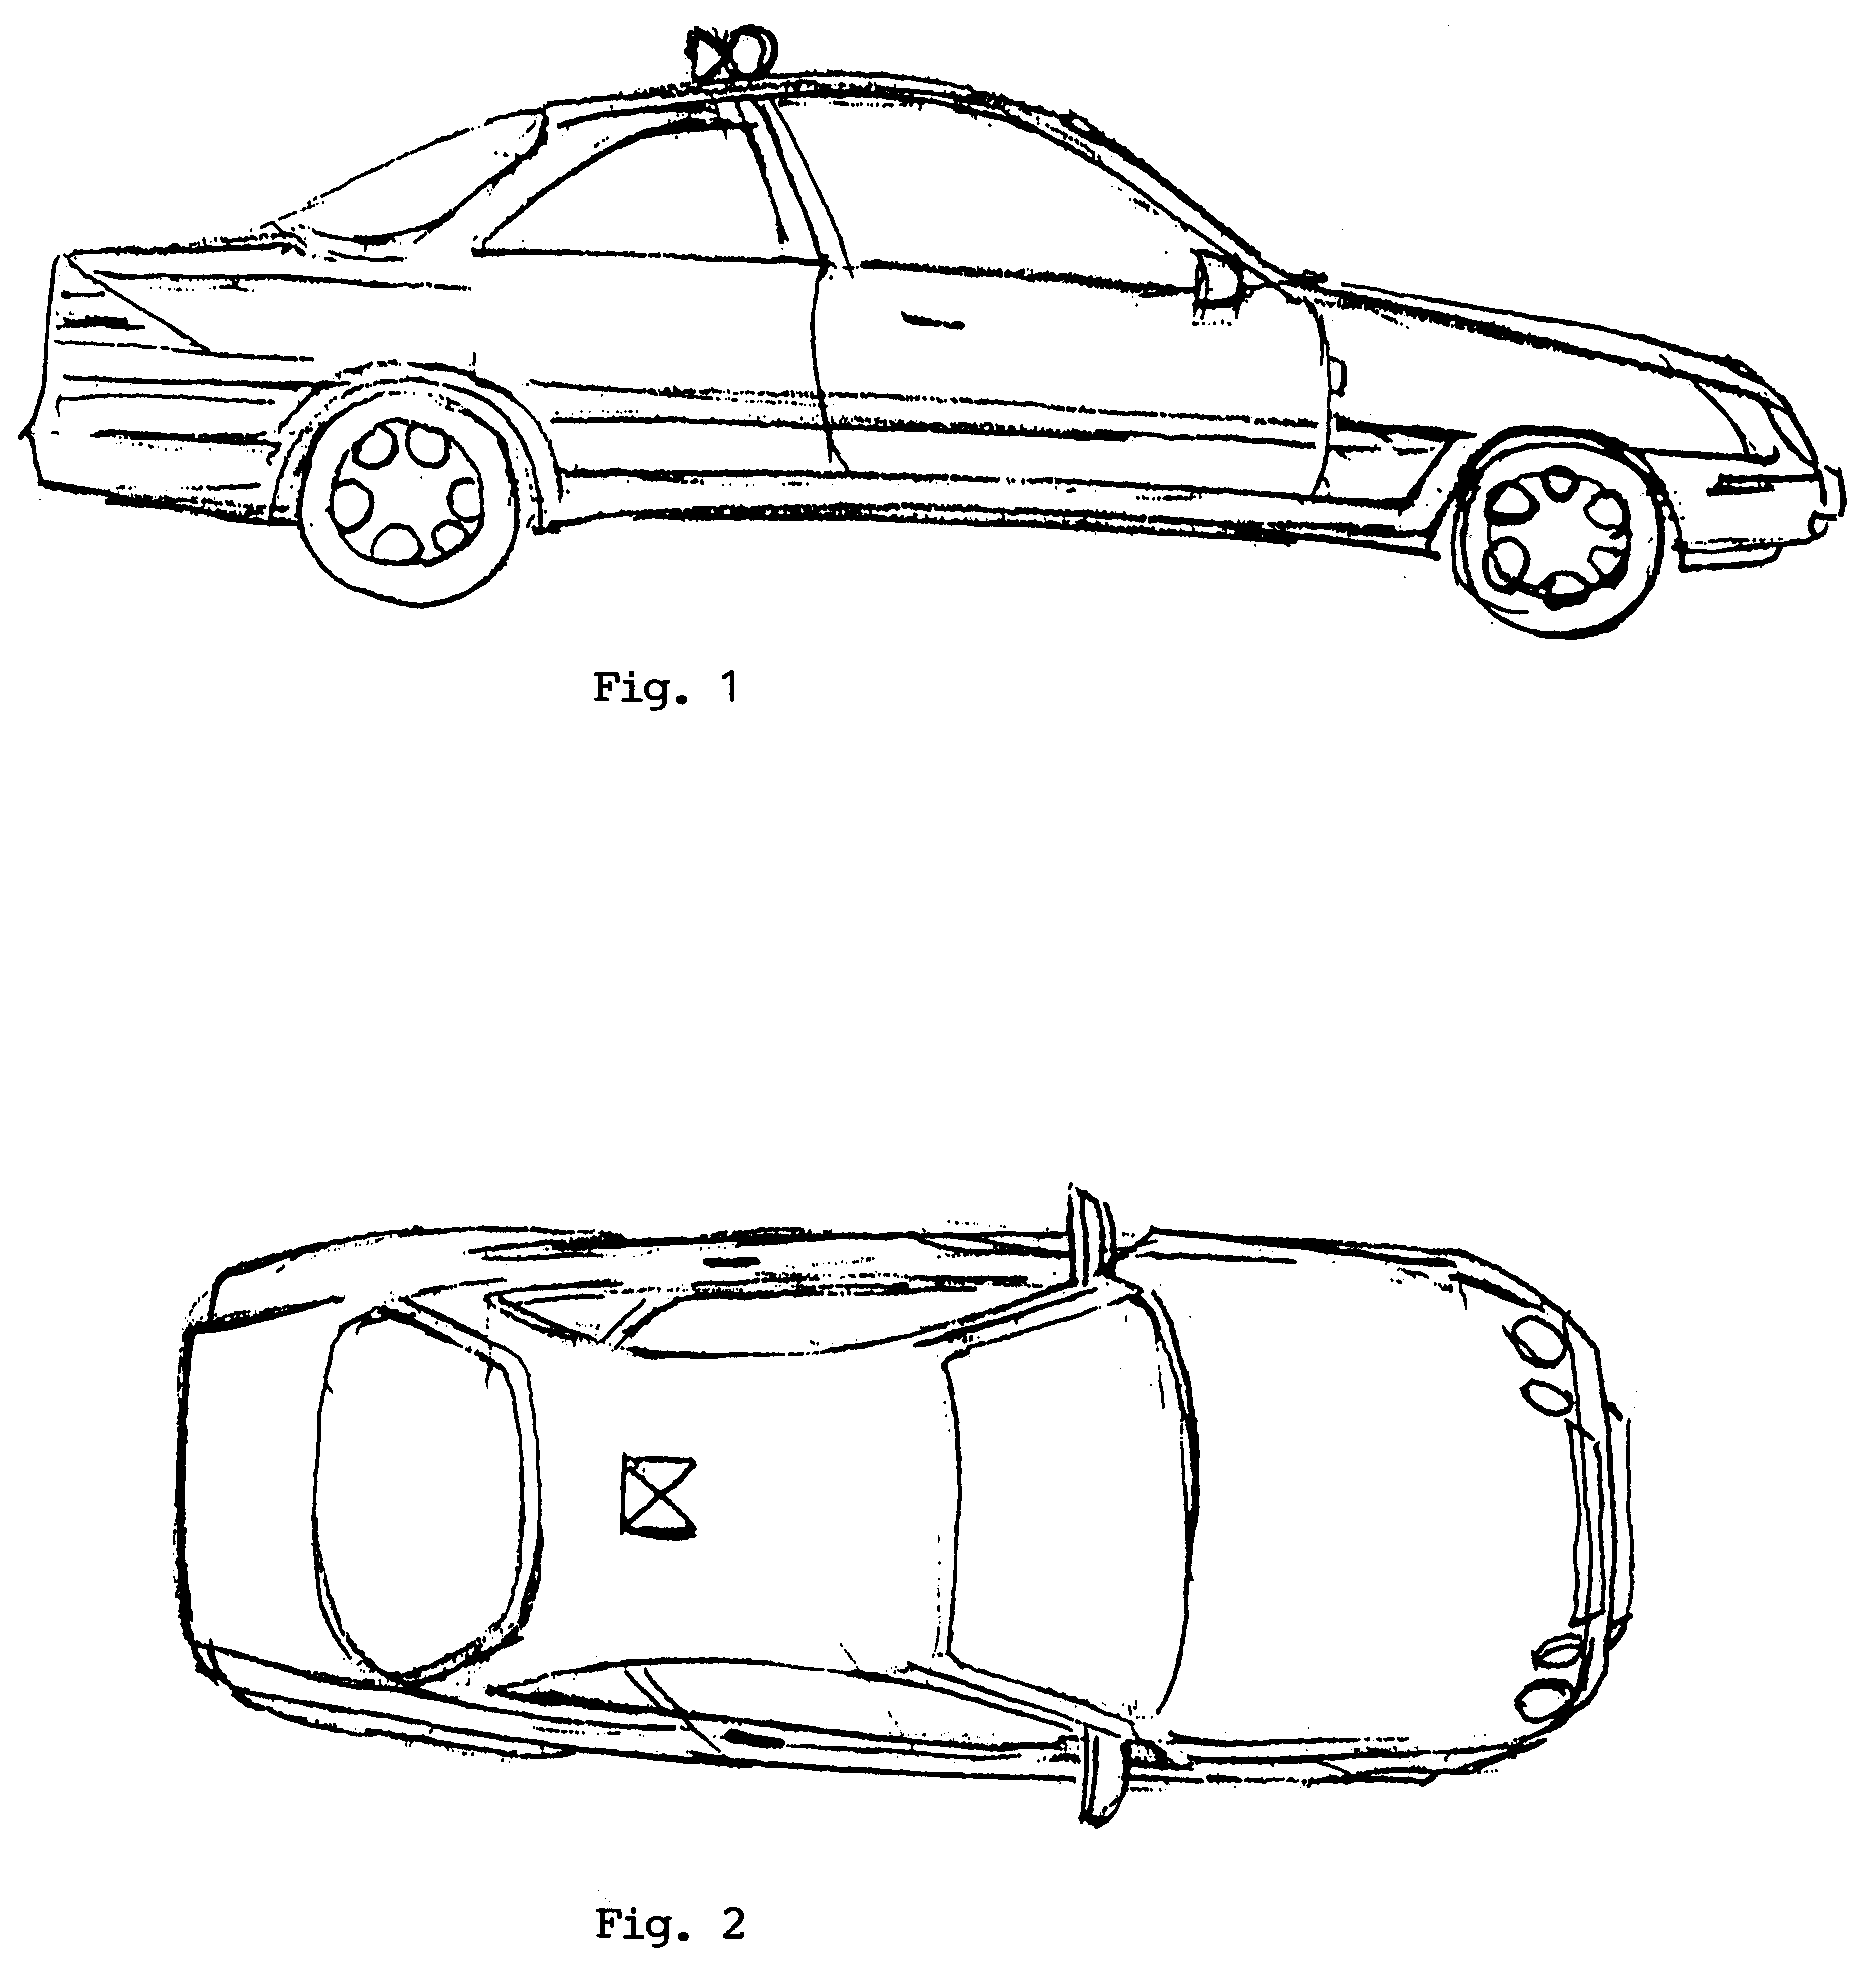 Wide-angled image display system for automobiles